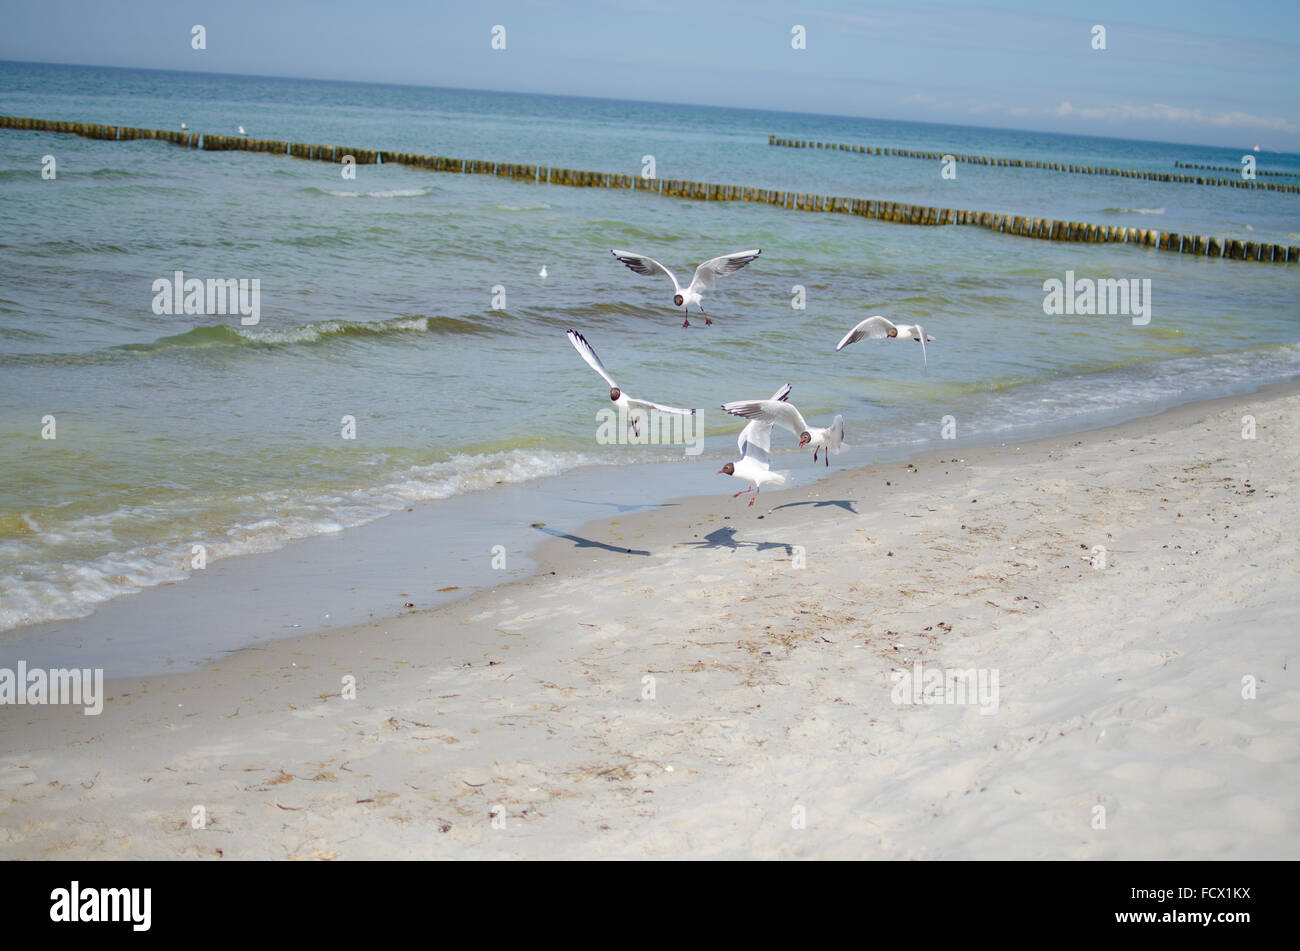 Flying birds at Zingst Germany Stock Photo